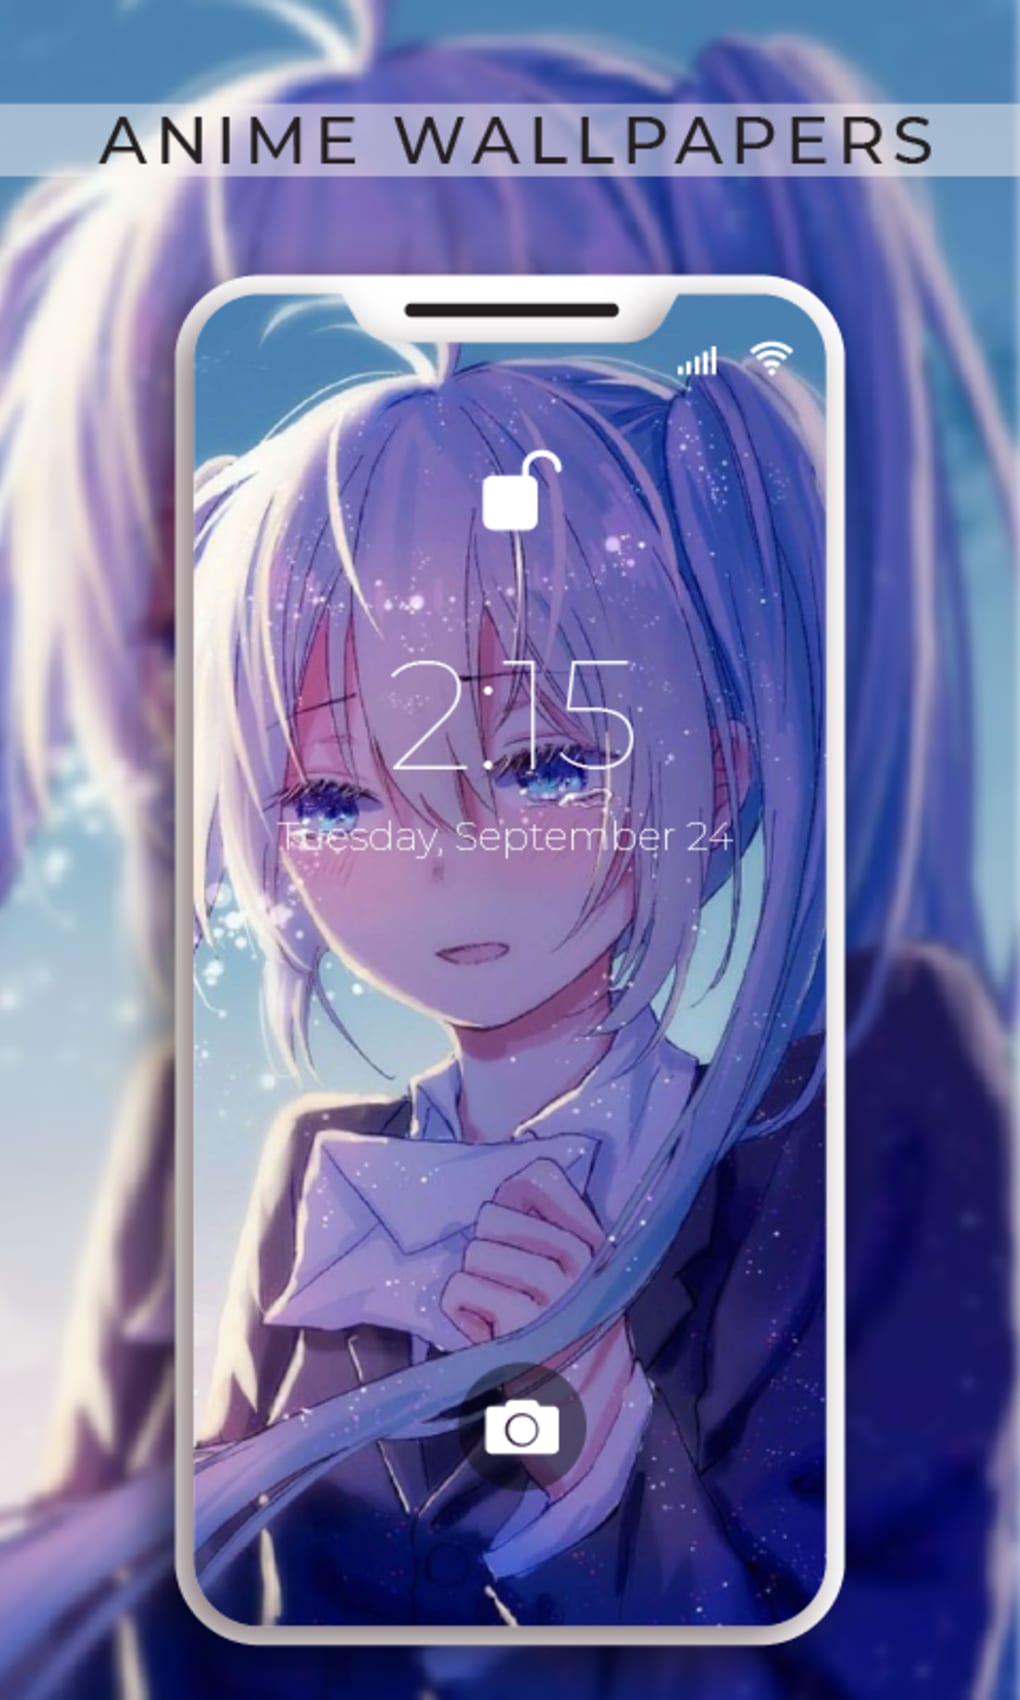 cute anime girl wallpapers free app by aesthicswallpapers on DeviantArt